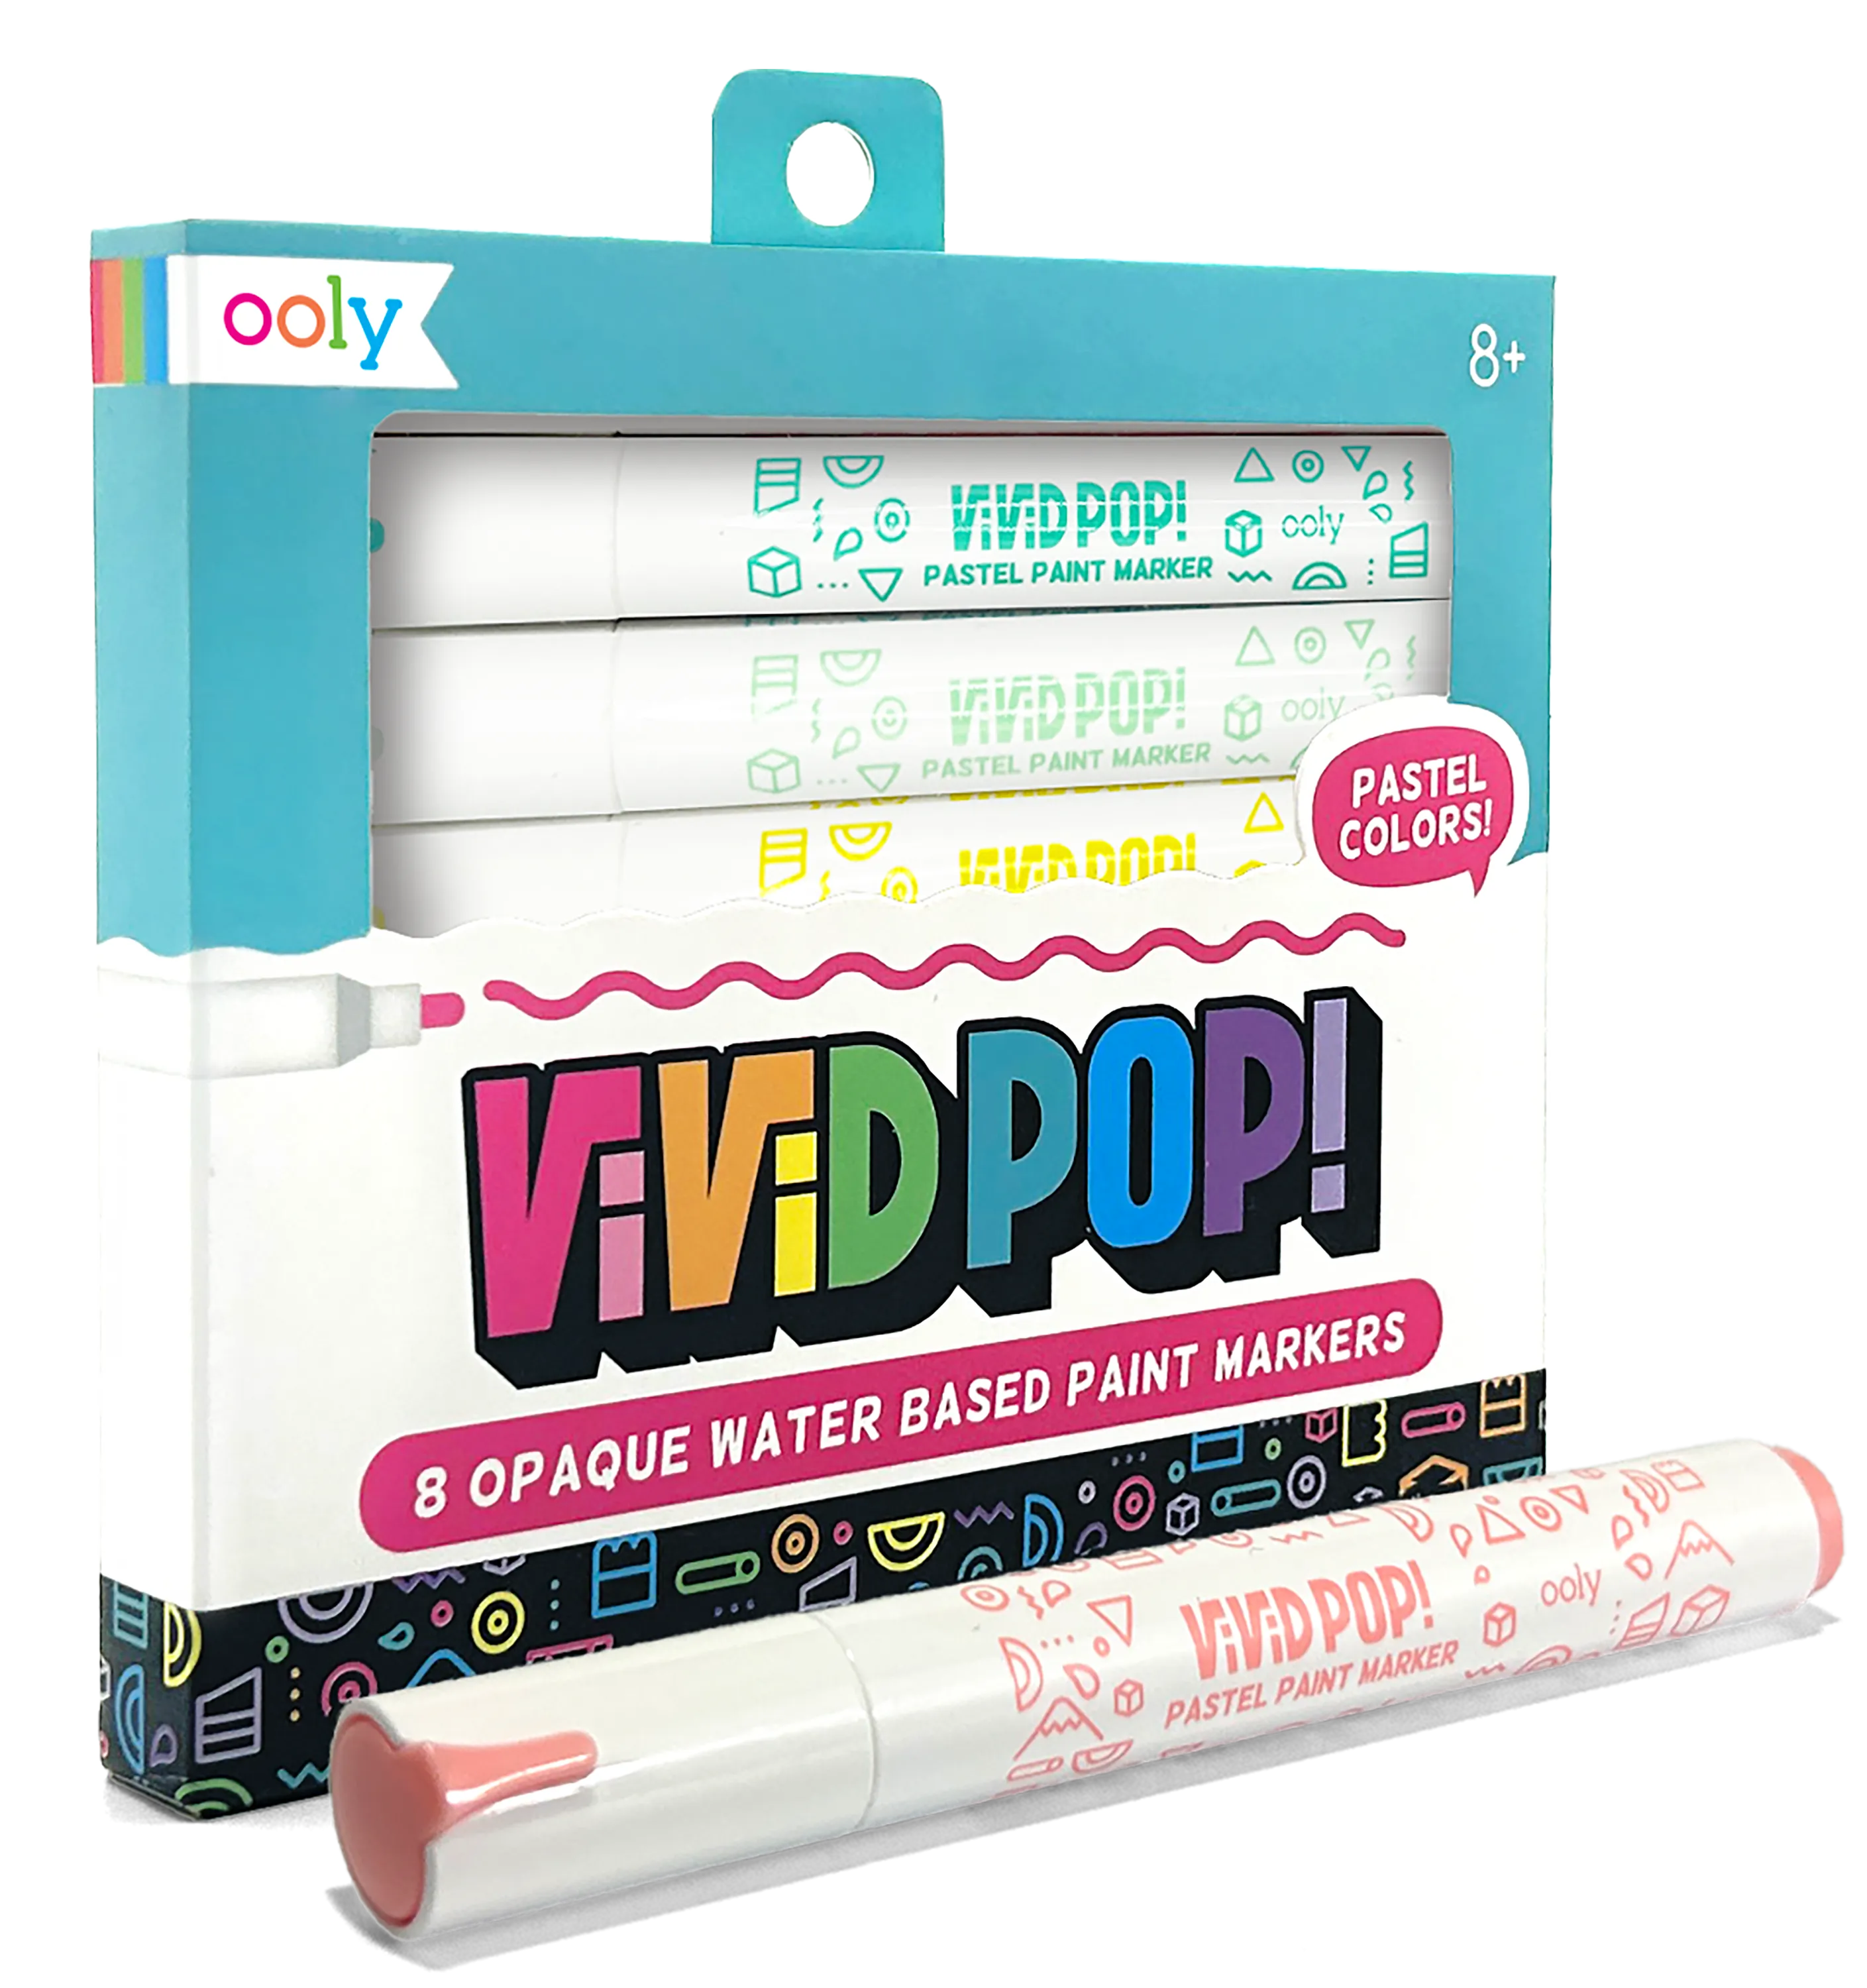 Quarter angle of OOLY Vivid Pop! Water Based Paint Markers - Pastel packaging